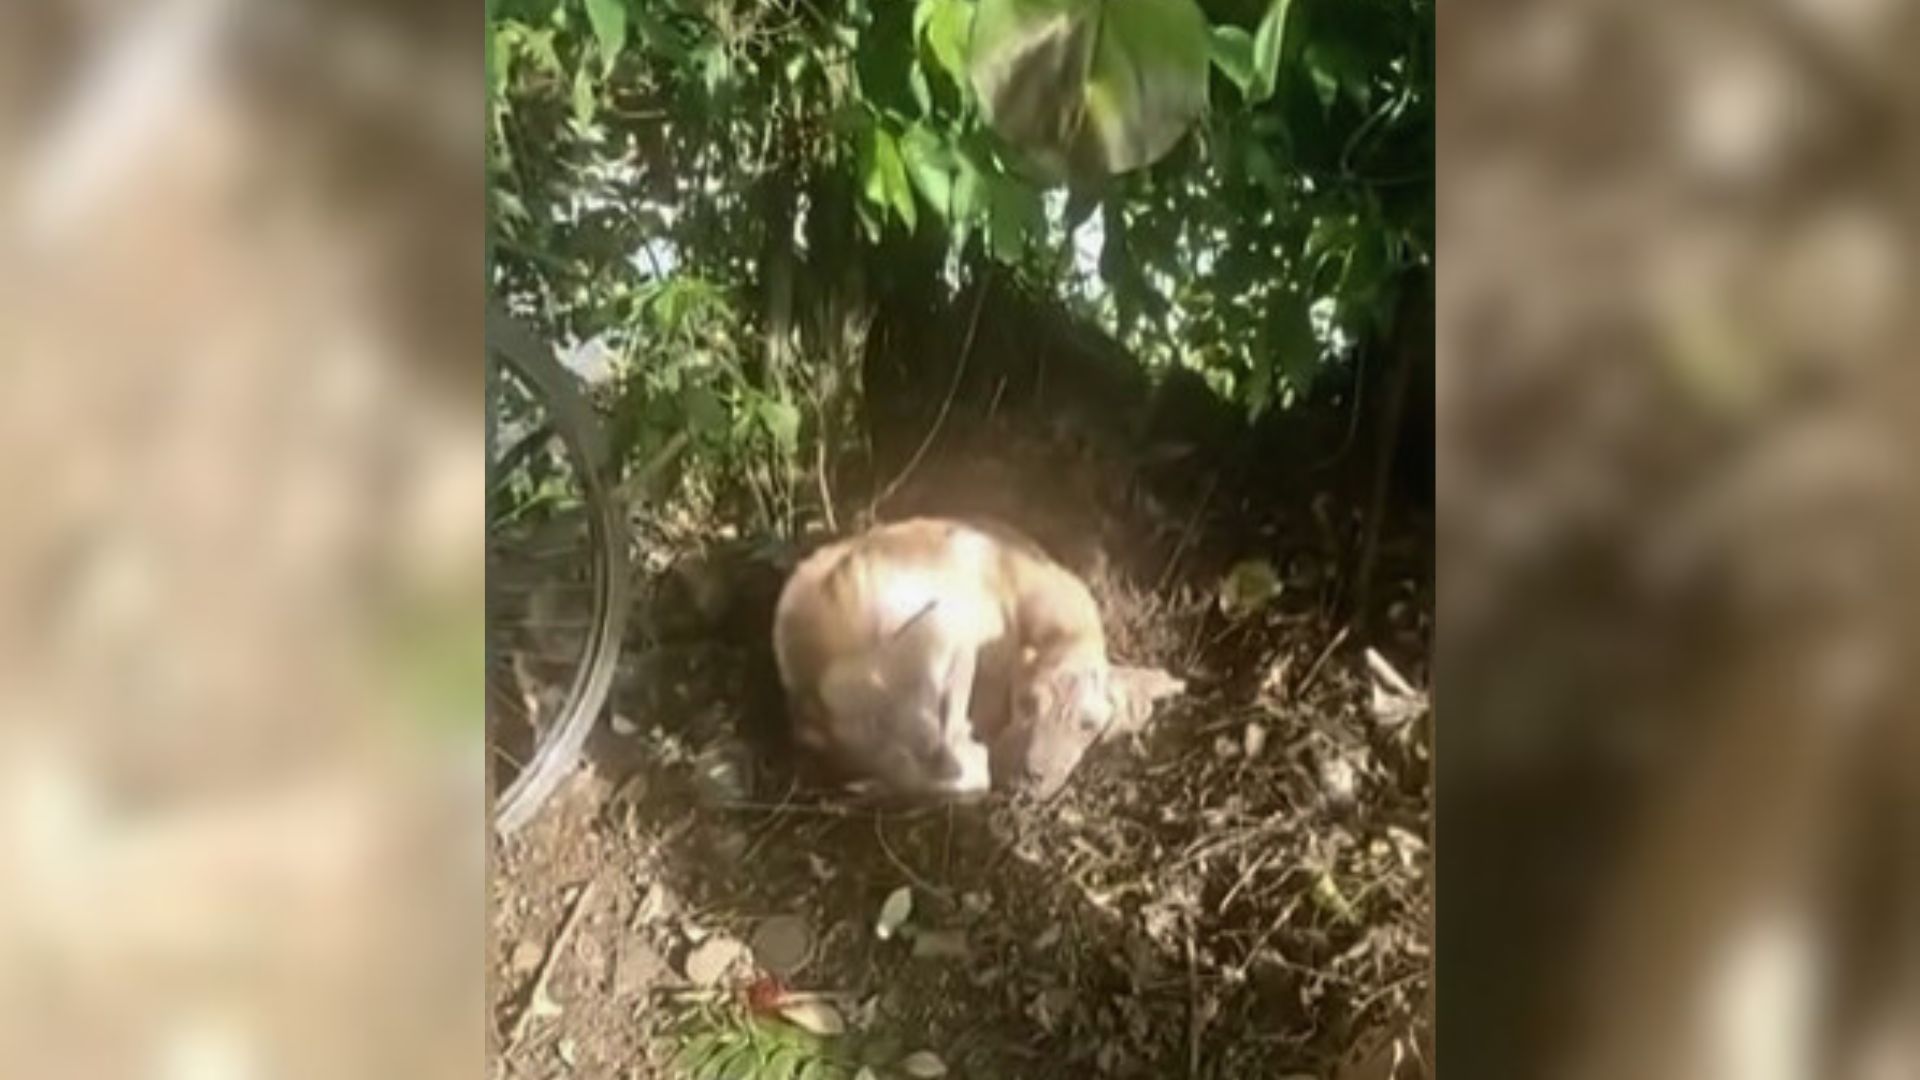 Volunteer Finds A Starving Dog Lying Helplessly In The Nearby Bushes And Immediately Rushes To Help